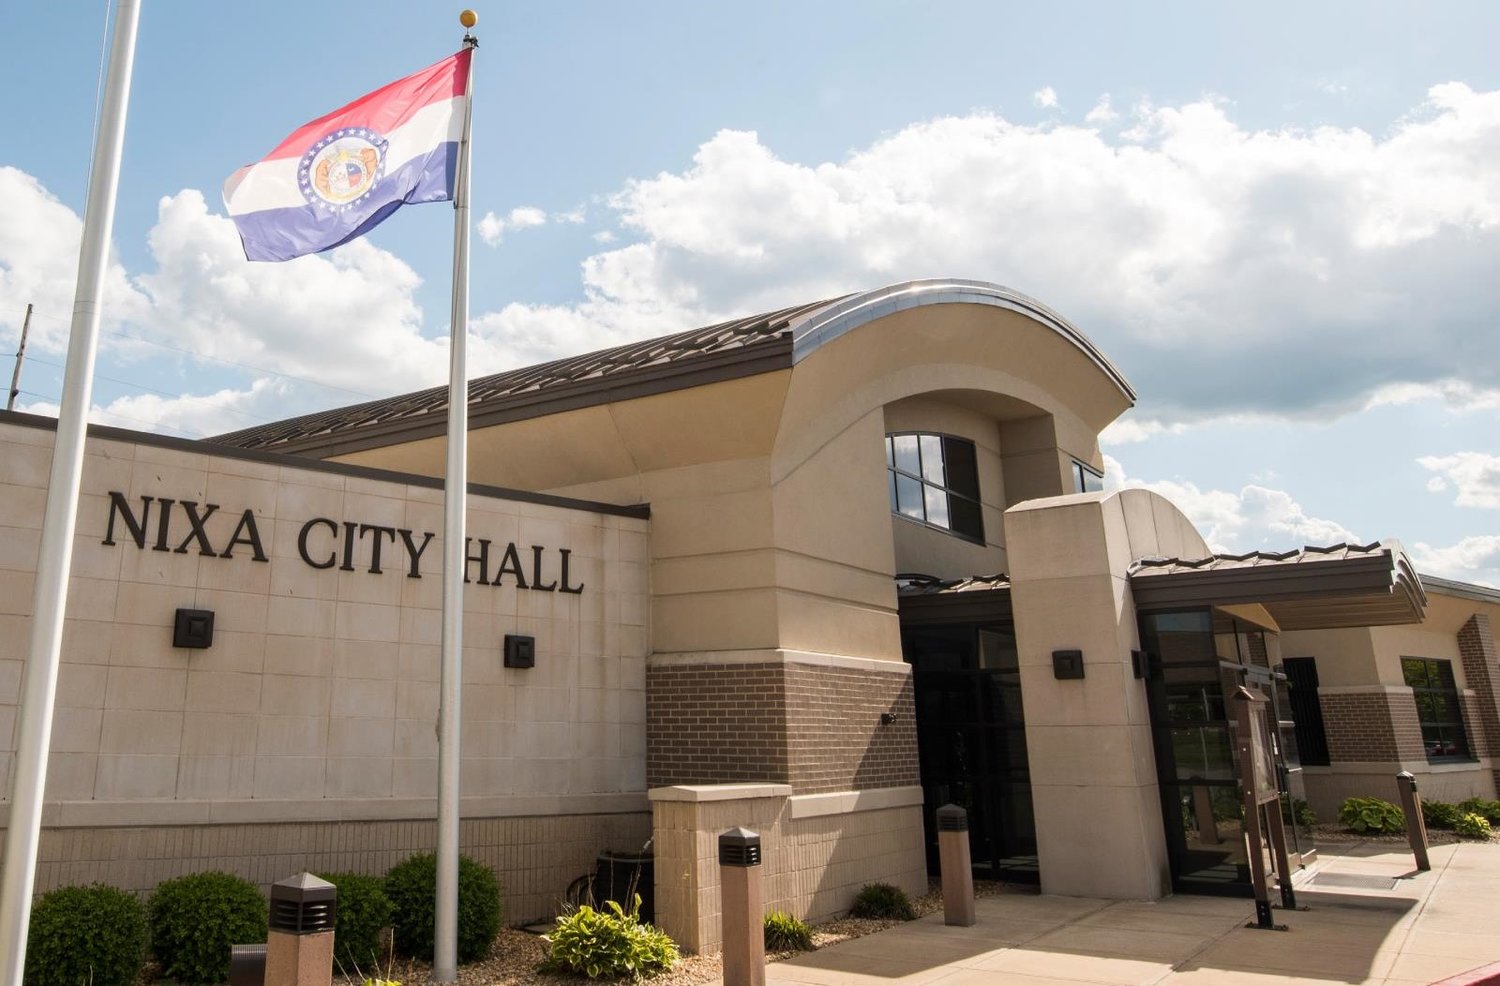 City staff recommend approval of both purchases.